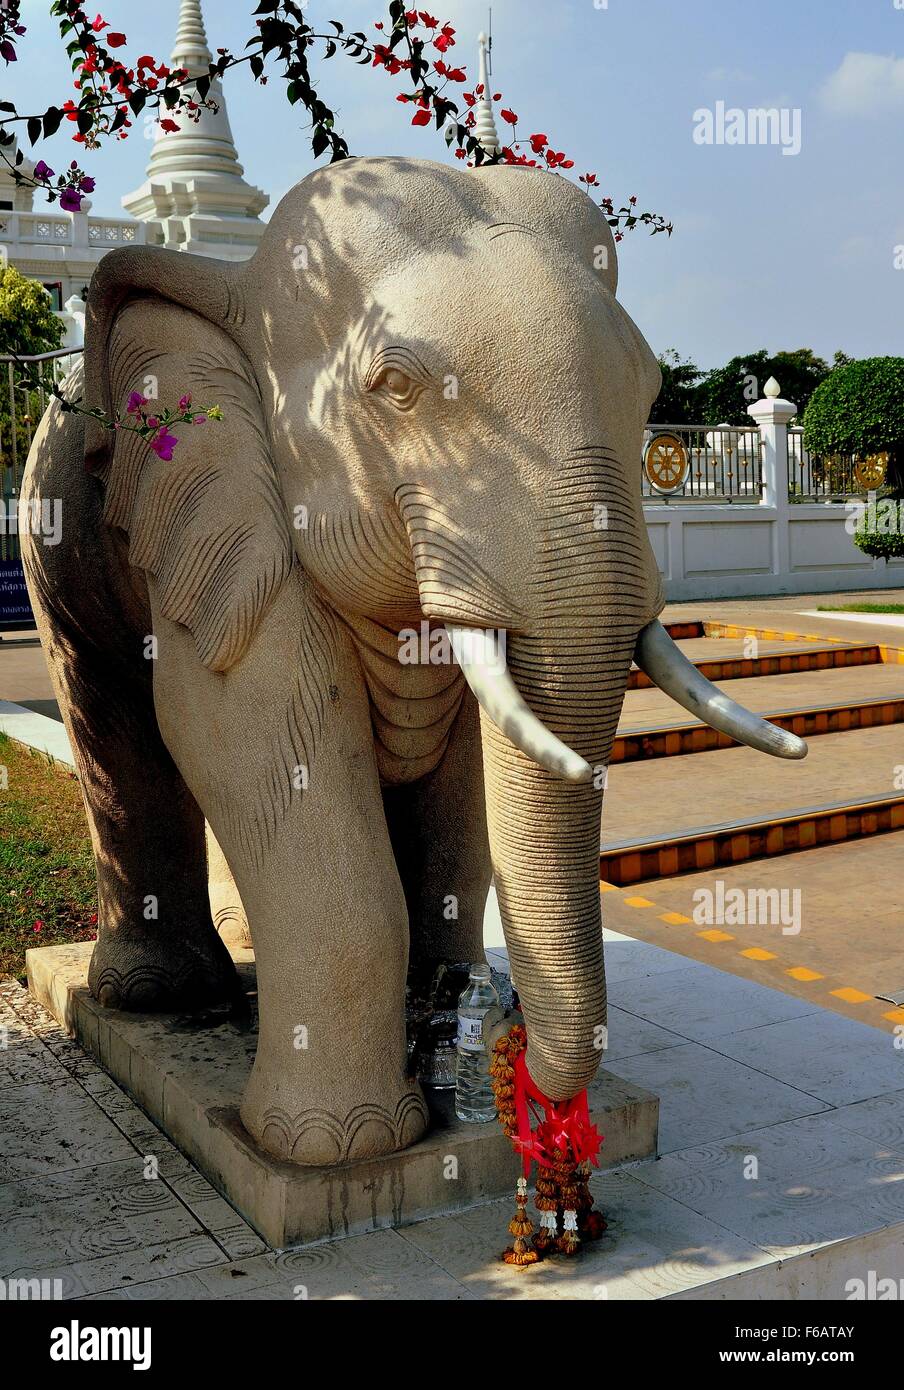 Samut Prakan, Thailand:  Statue of an elephant with several offerings left on its trunk at Wat Asoke Stock Photo